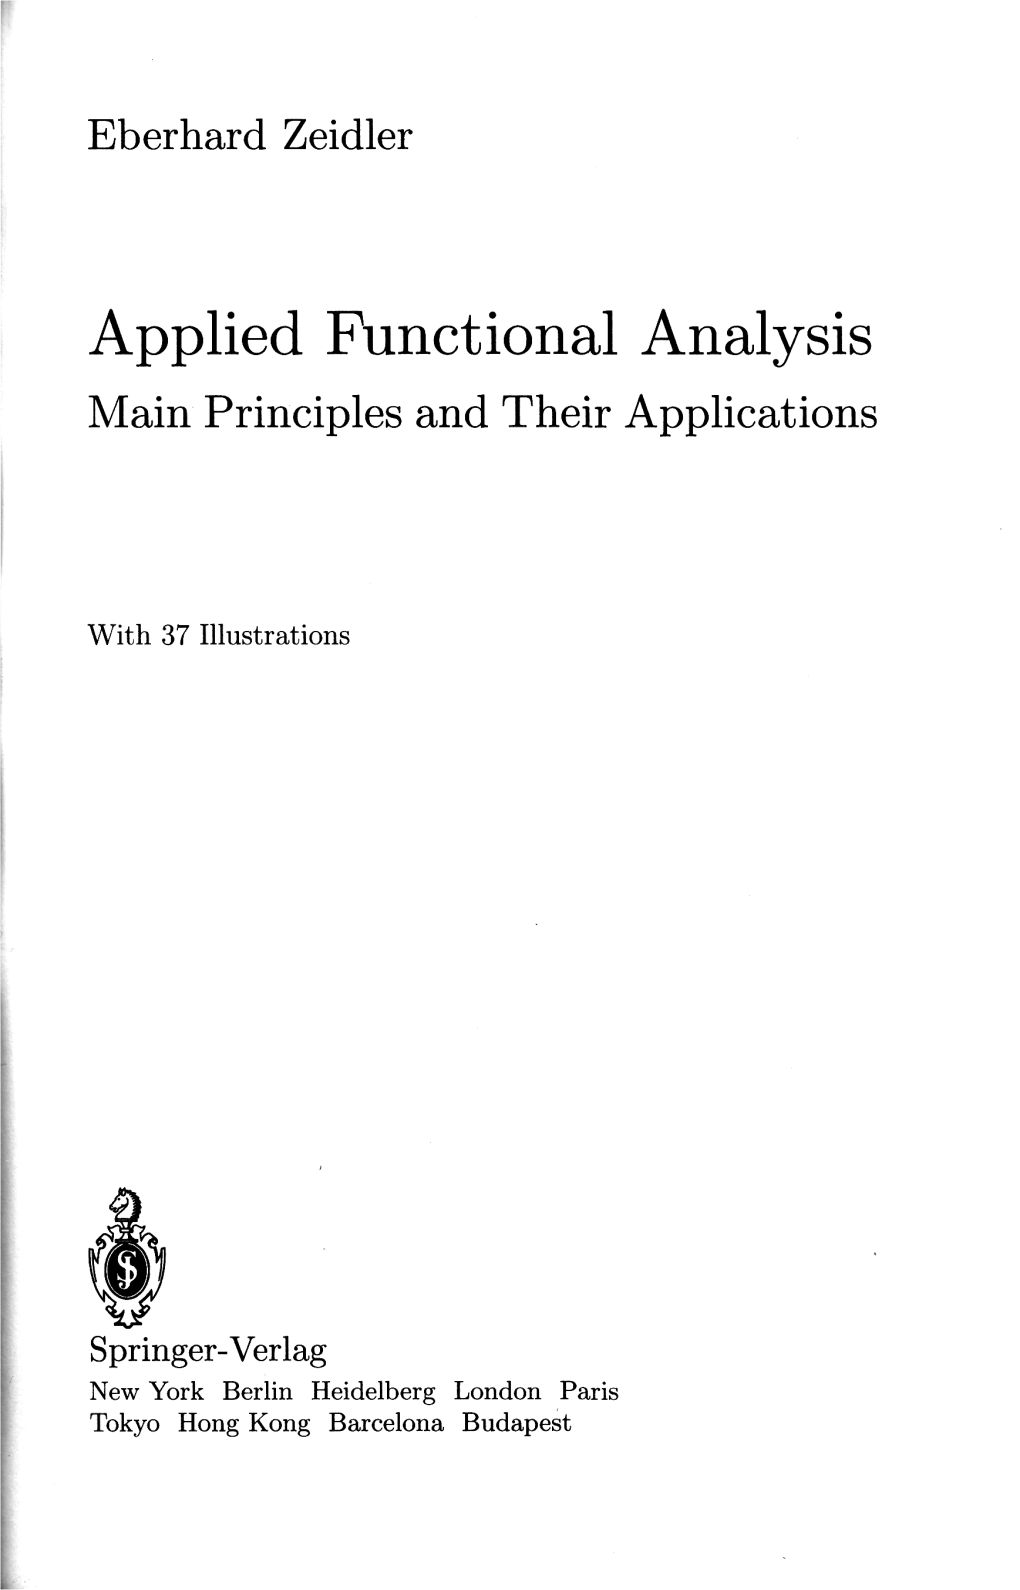 Applied Functional Analysis Main Principles and Their Applications